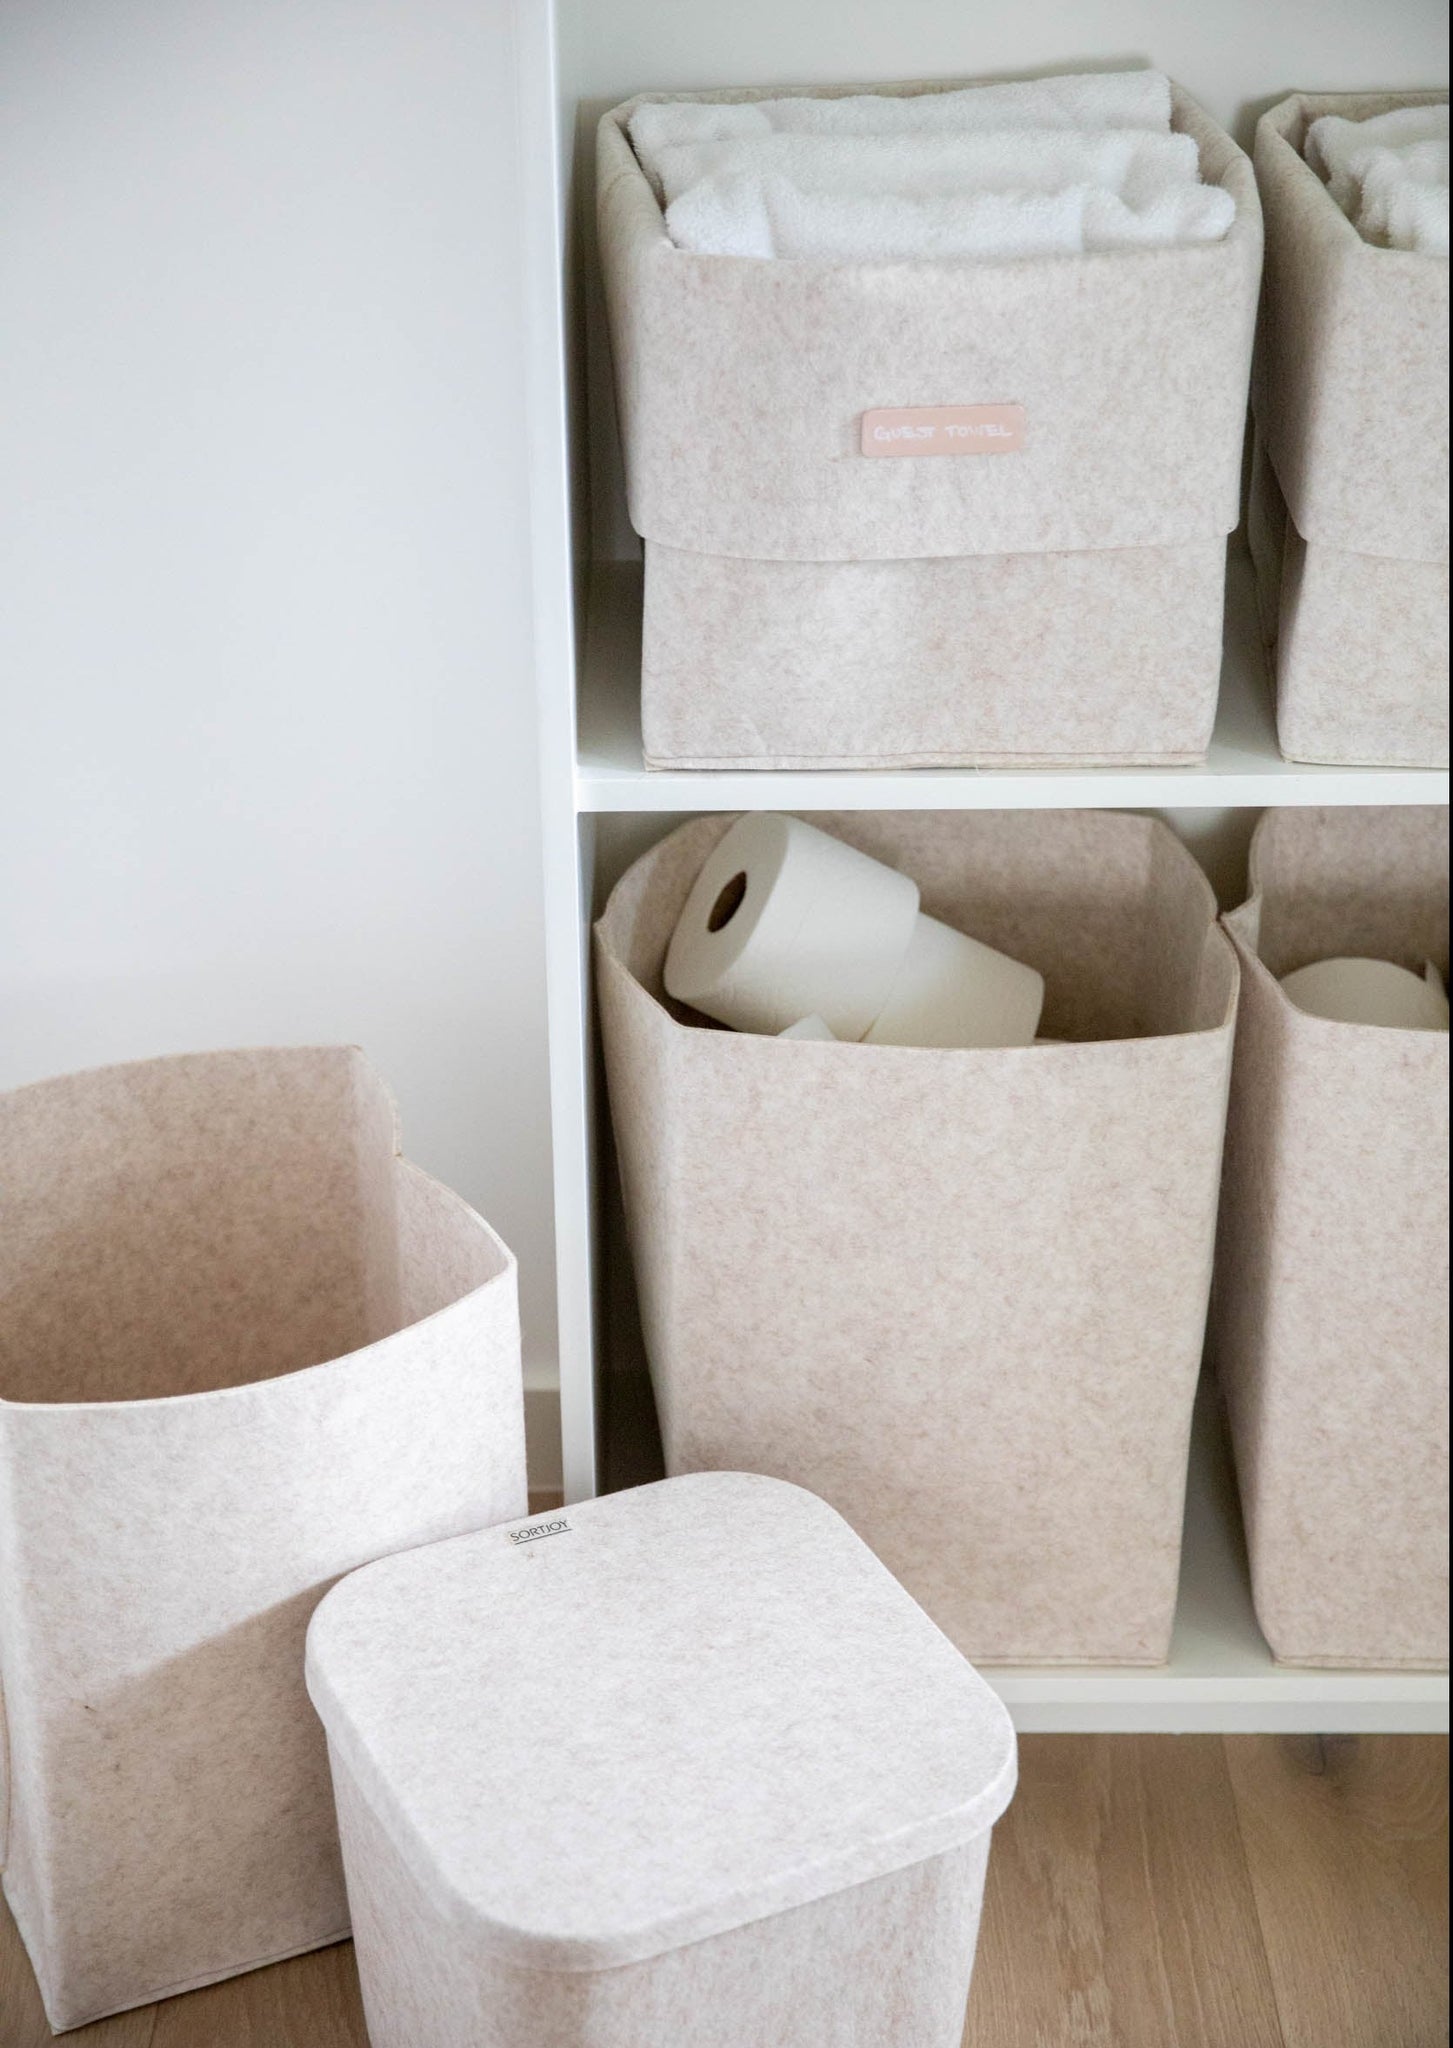 11 Highest-Rated Organizational Bins, Baskets and Dividers at The